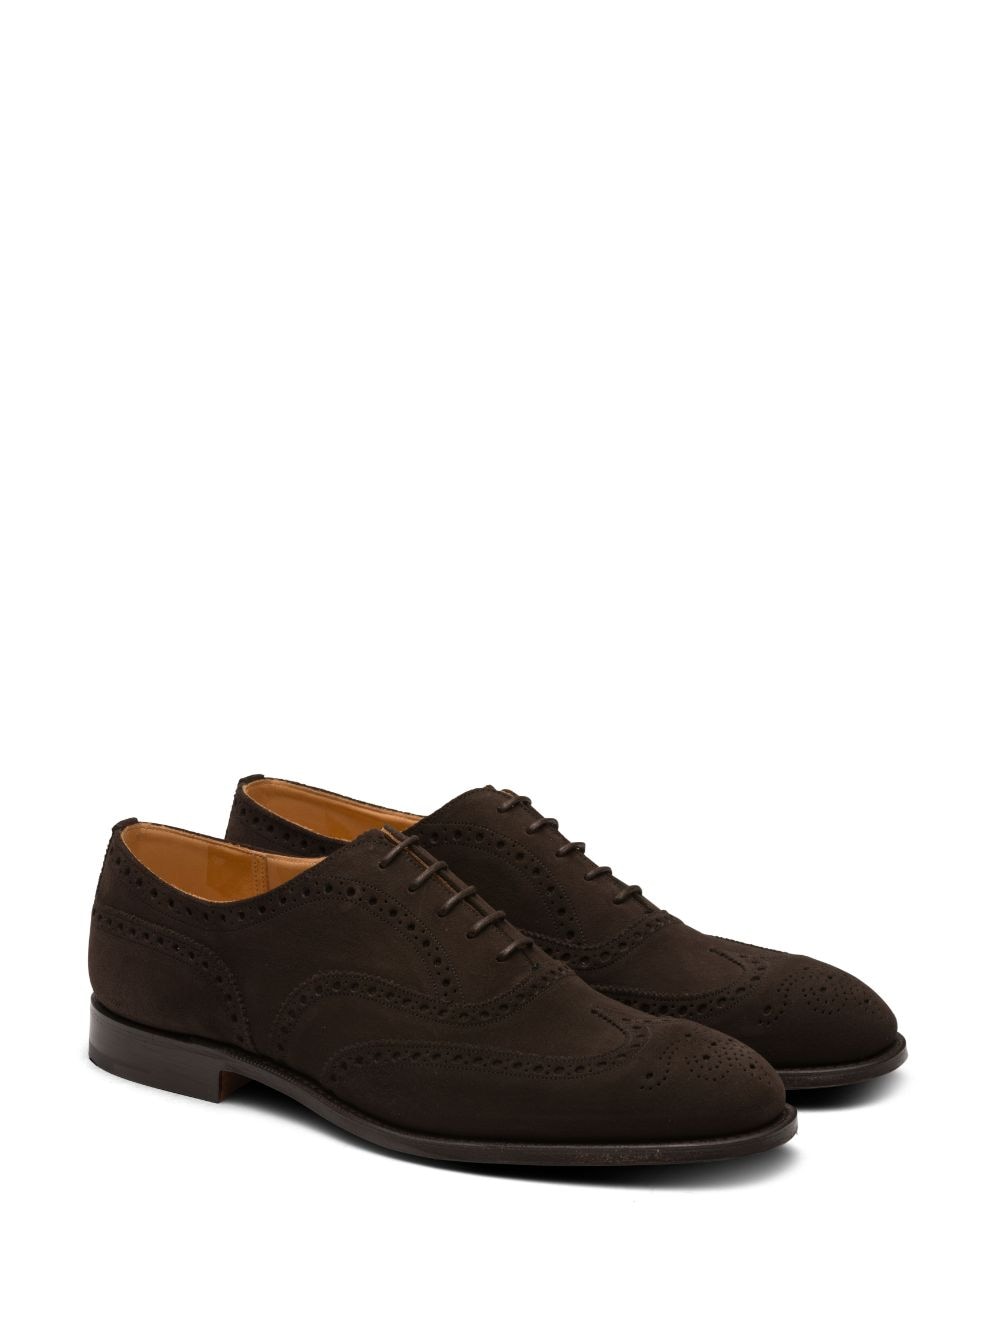 Shop Church's Chetwynd Suede Oxford Brogues In Brown